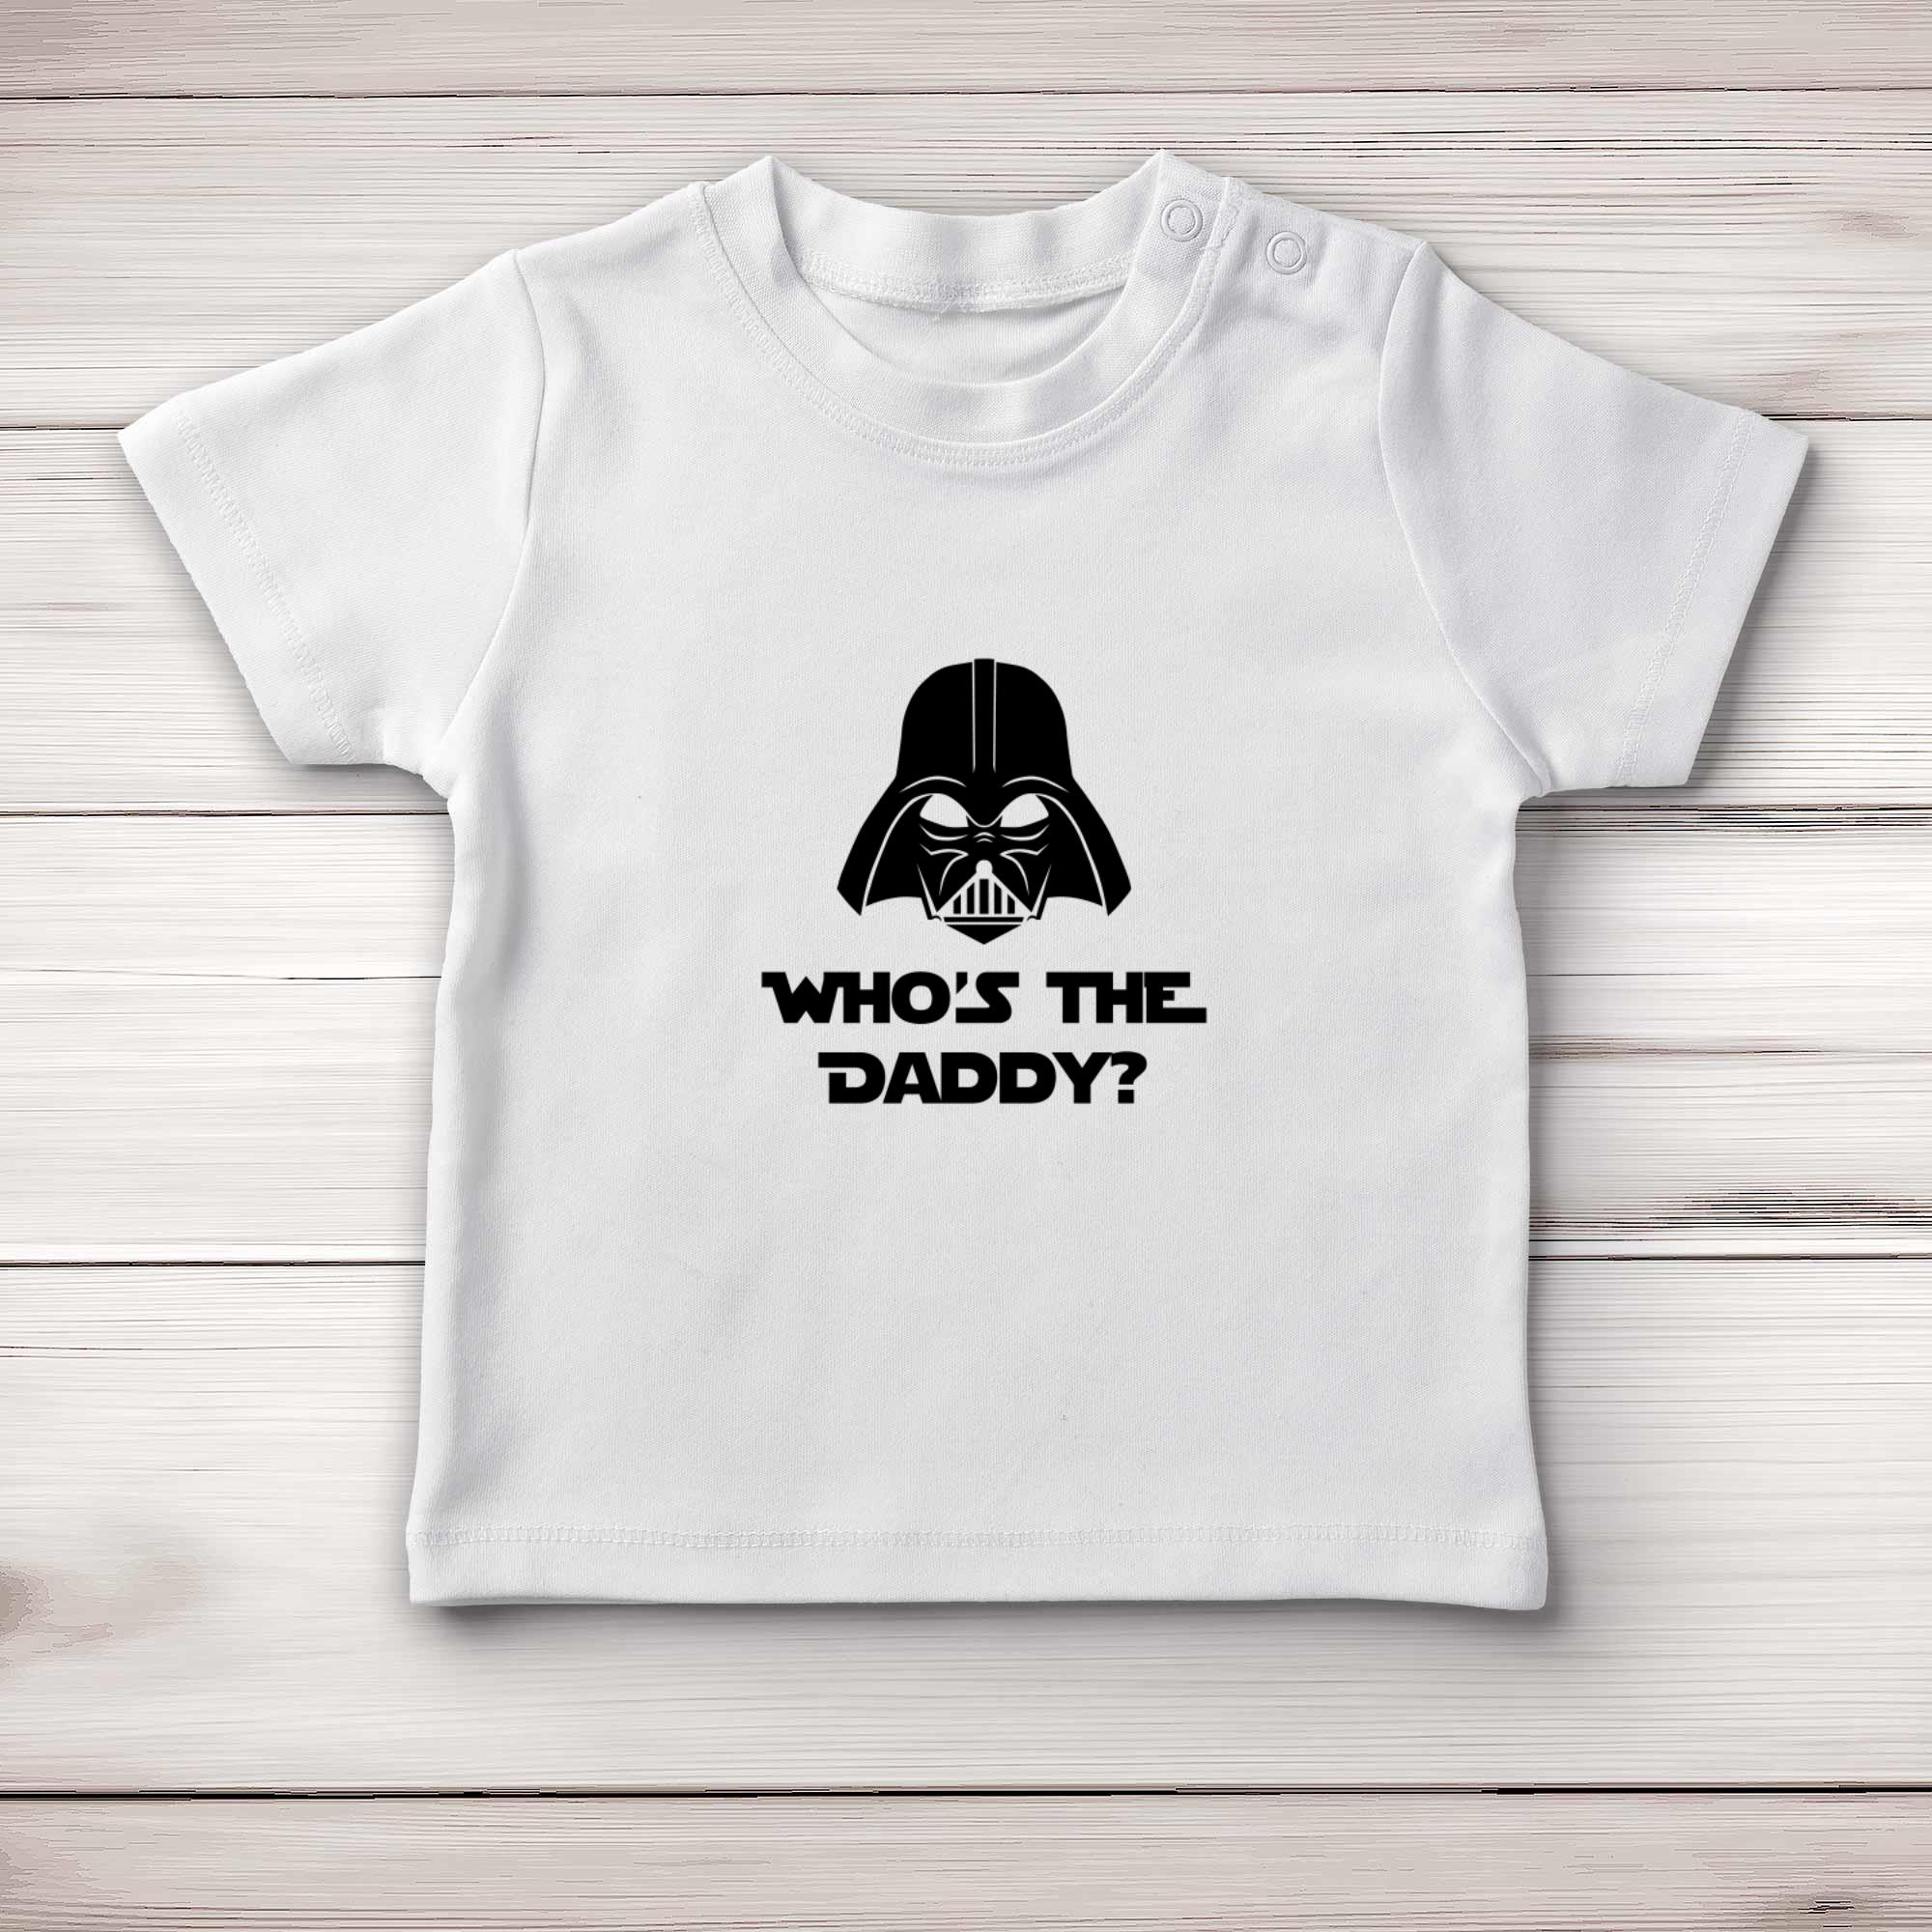 Who's The Daddy - Geeky Baby T-Shirts - Slightly Disturbed - Image 1 of 4